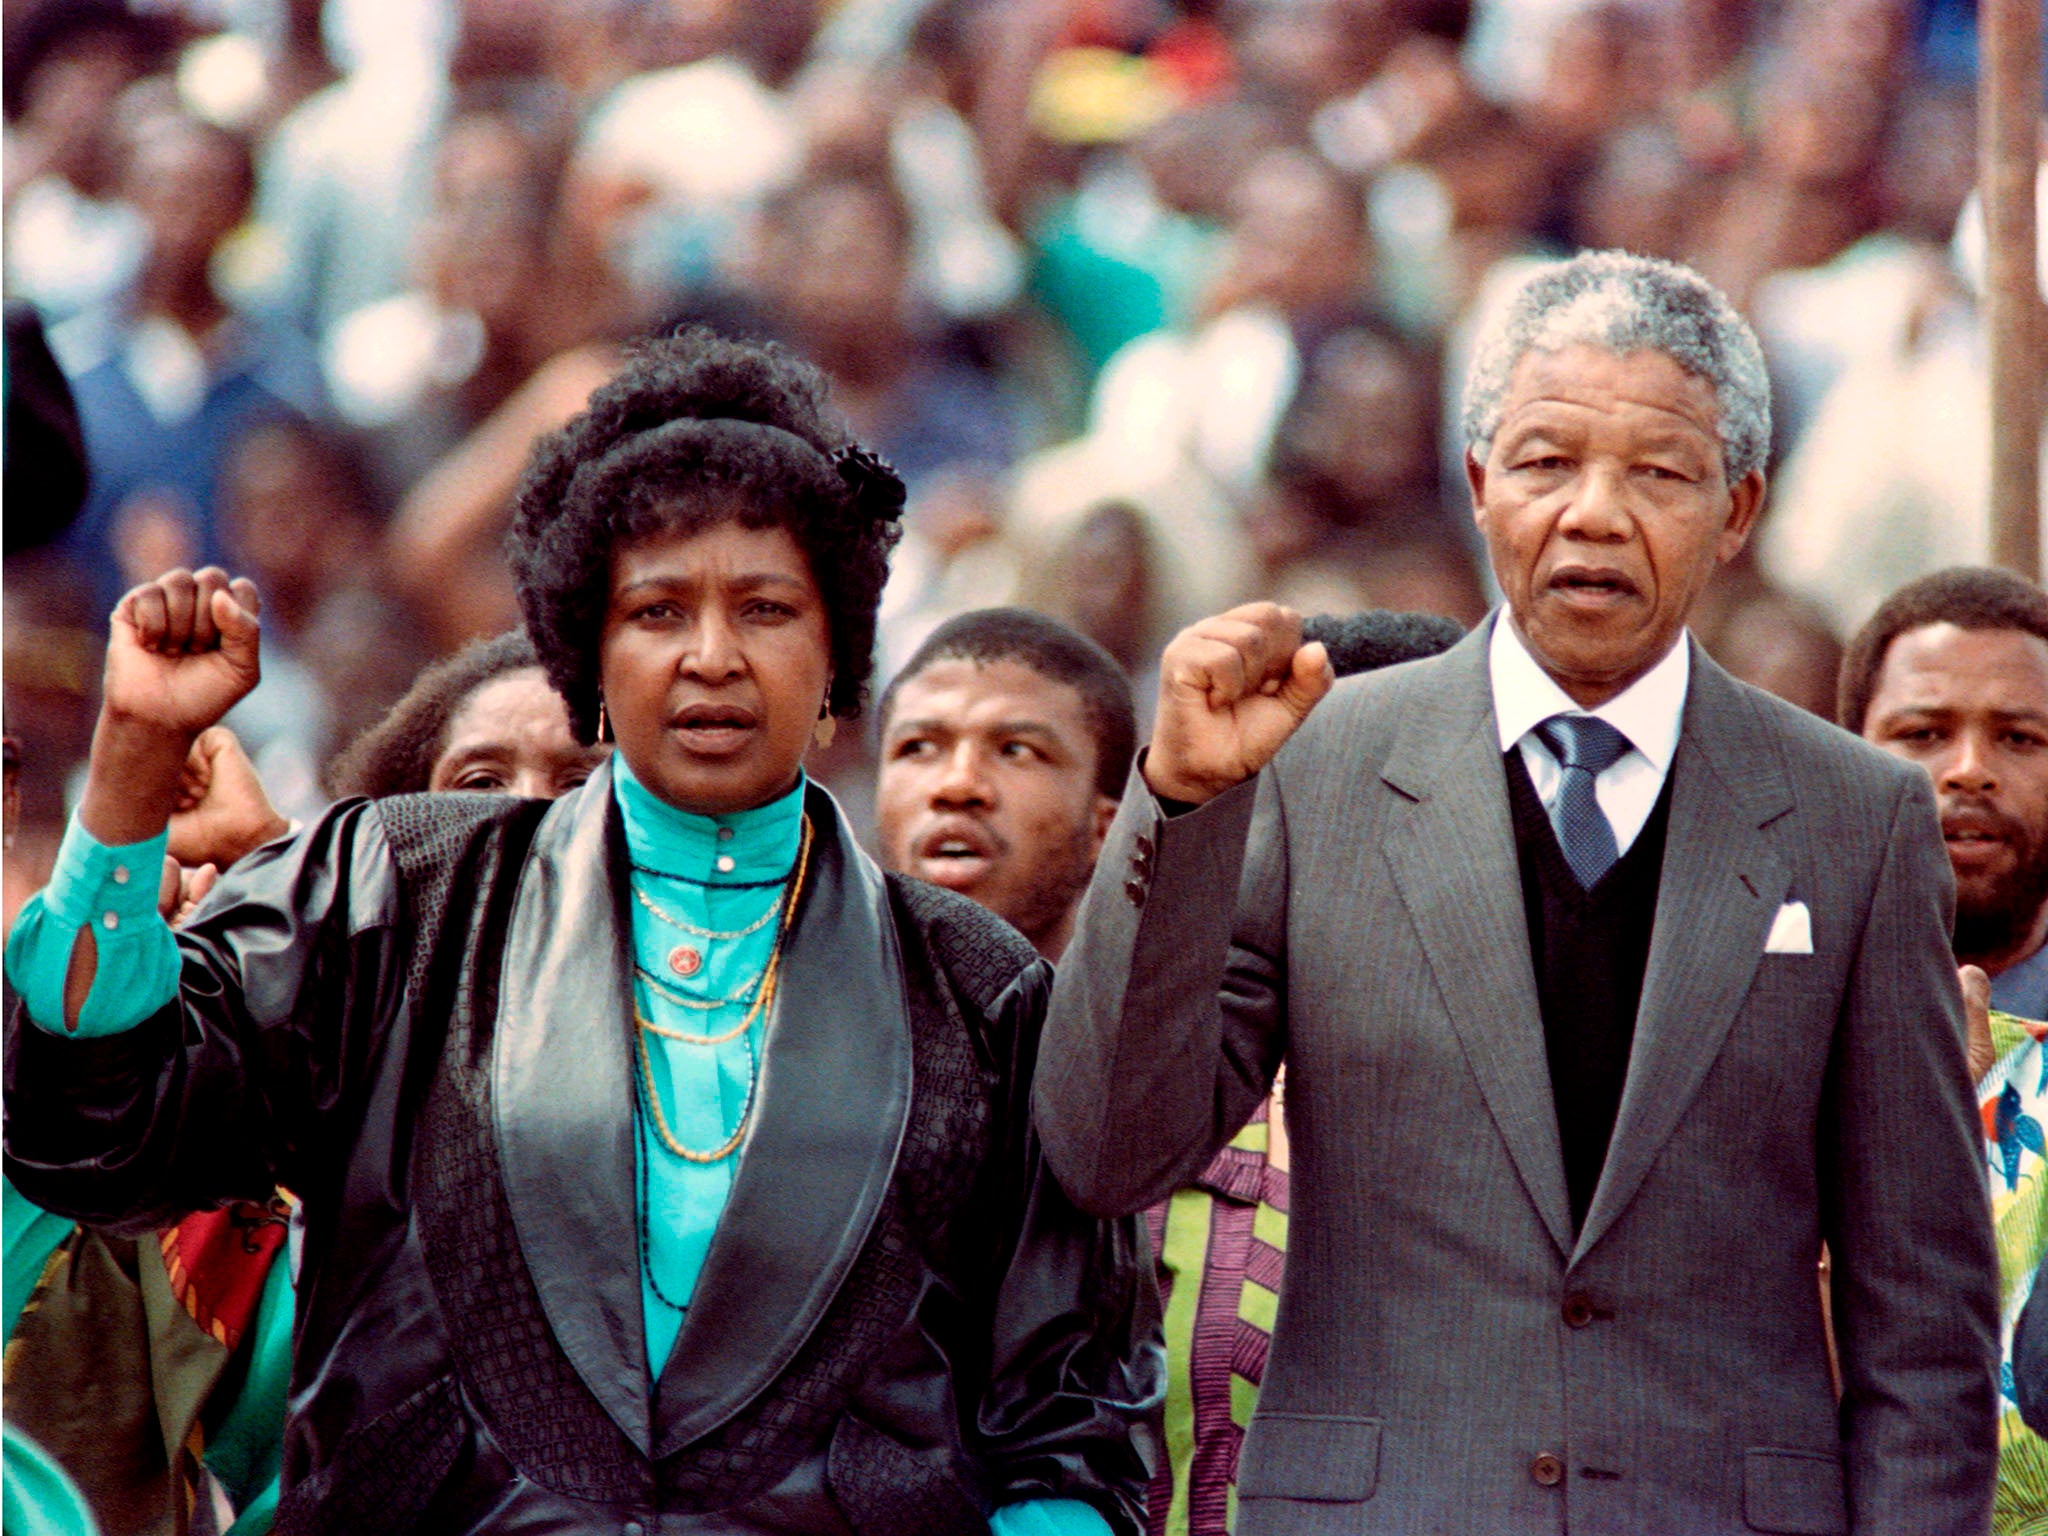 Nelson Mandela and his then-wife Winnie at a rally on 13 February 1990, just two days after the anti-apartheid leader was released from prison